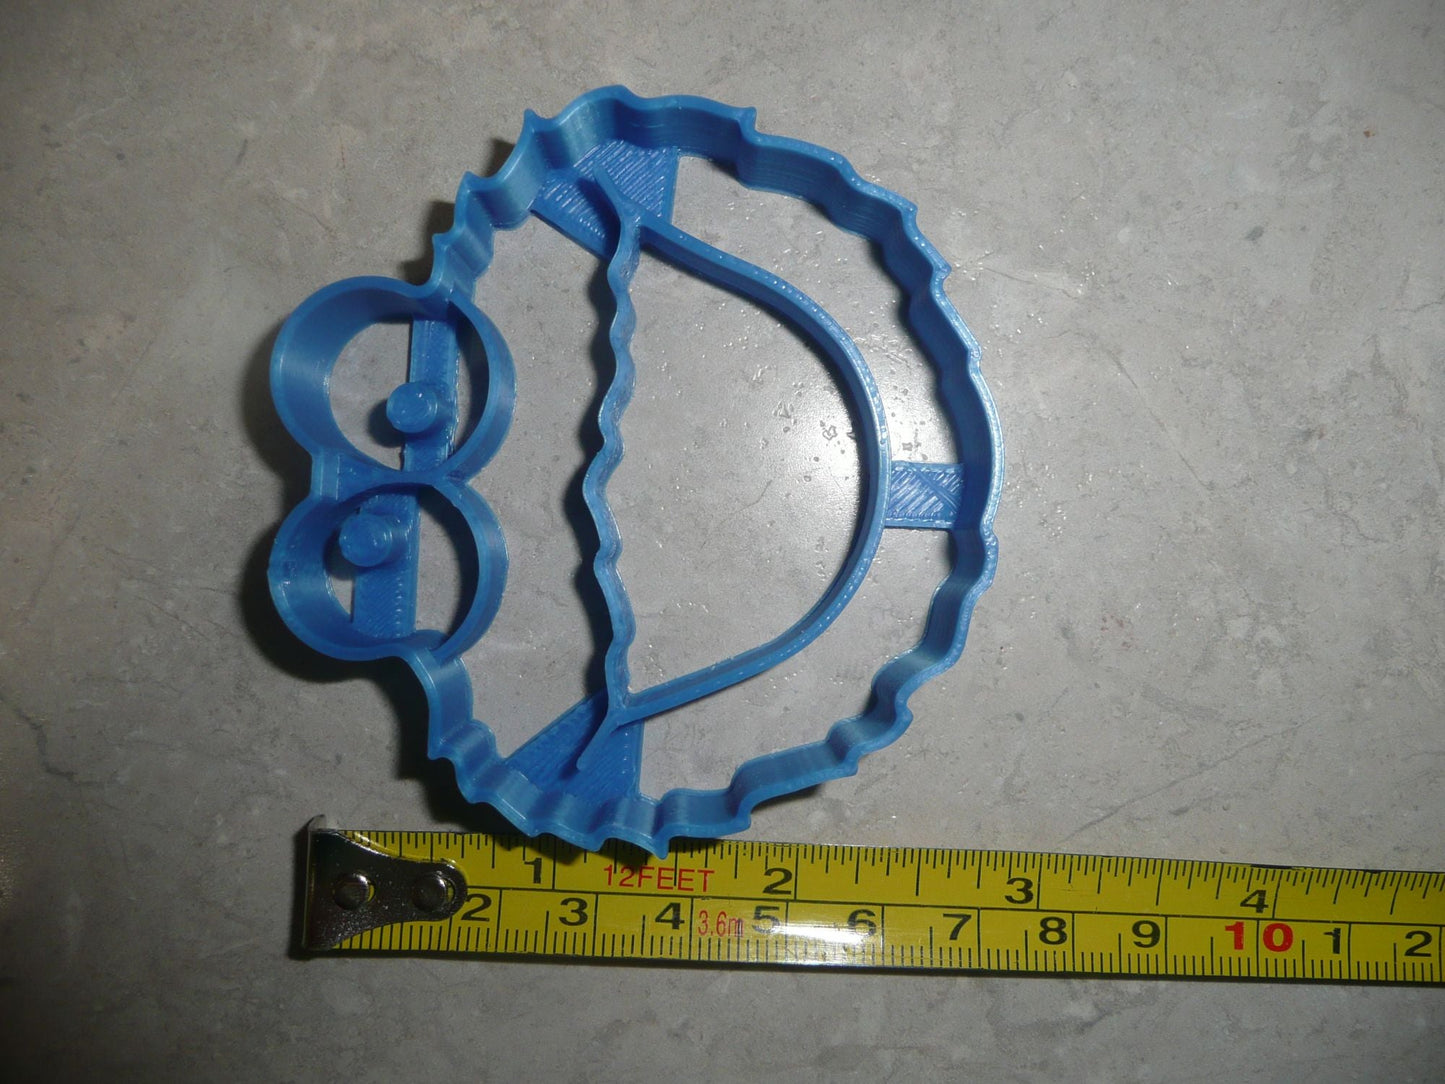 Cookie Monster Sesame Street Cookie Cutter Baking Tool Made In USA PR546